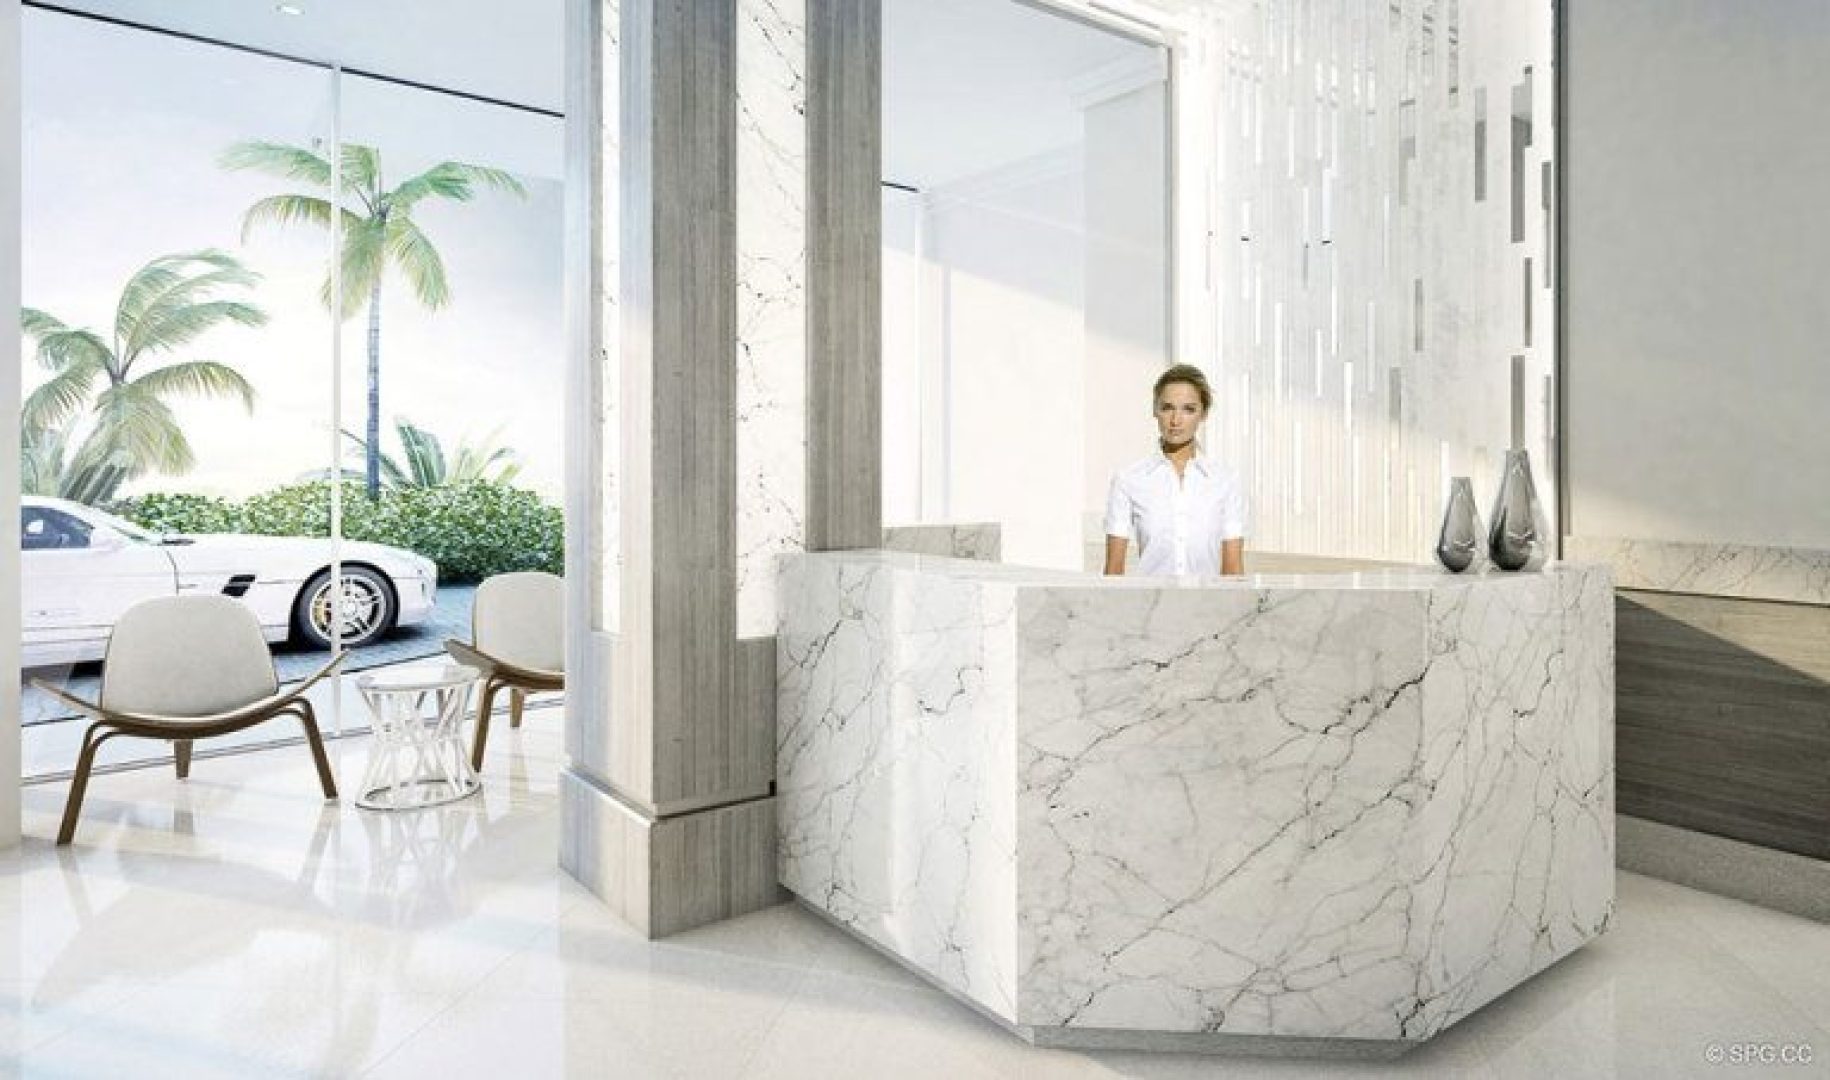 Reception Area in 321 at Water's Edge, Luxury Waterfront Condos in Fort Lauderdale, Florida 33304